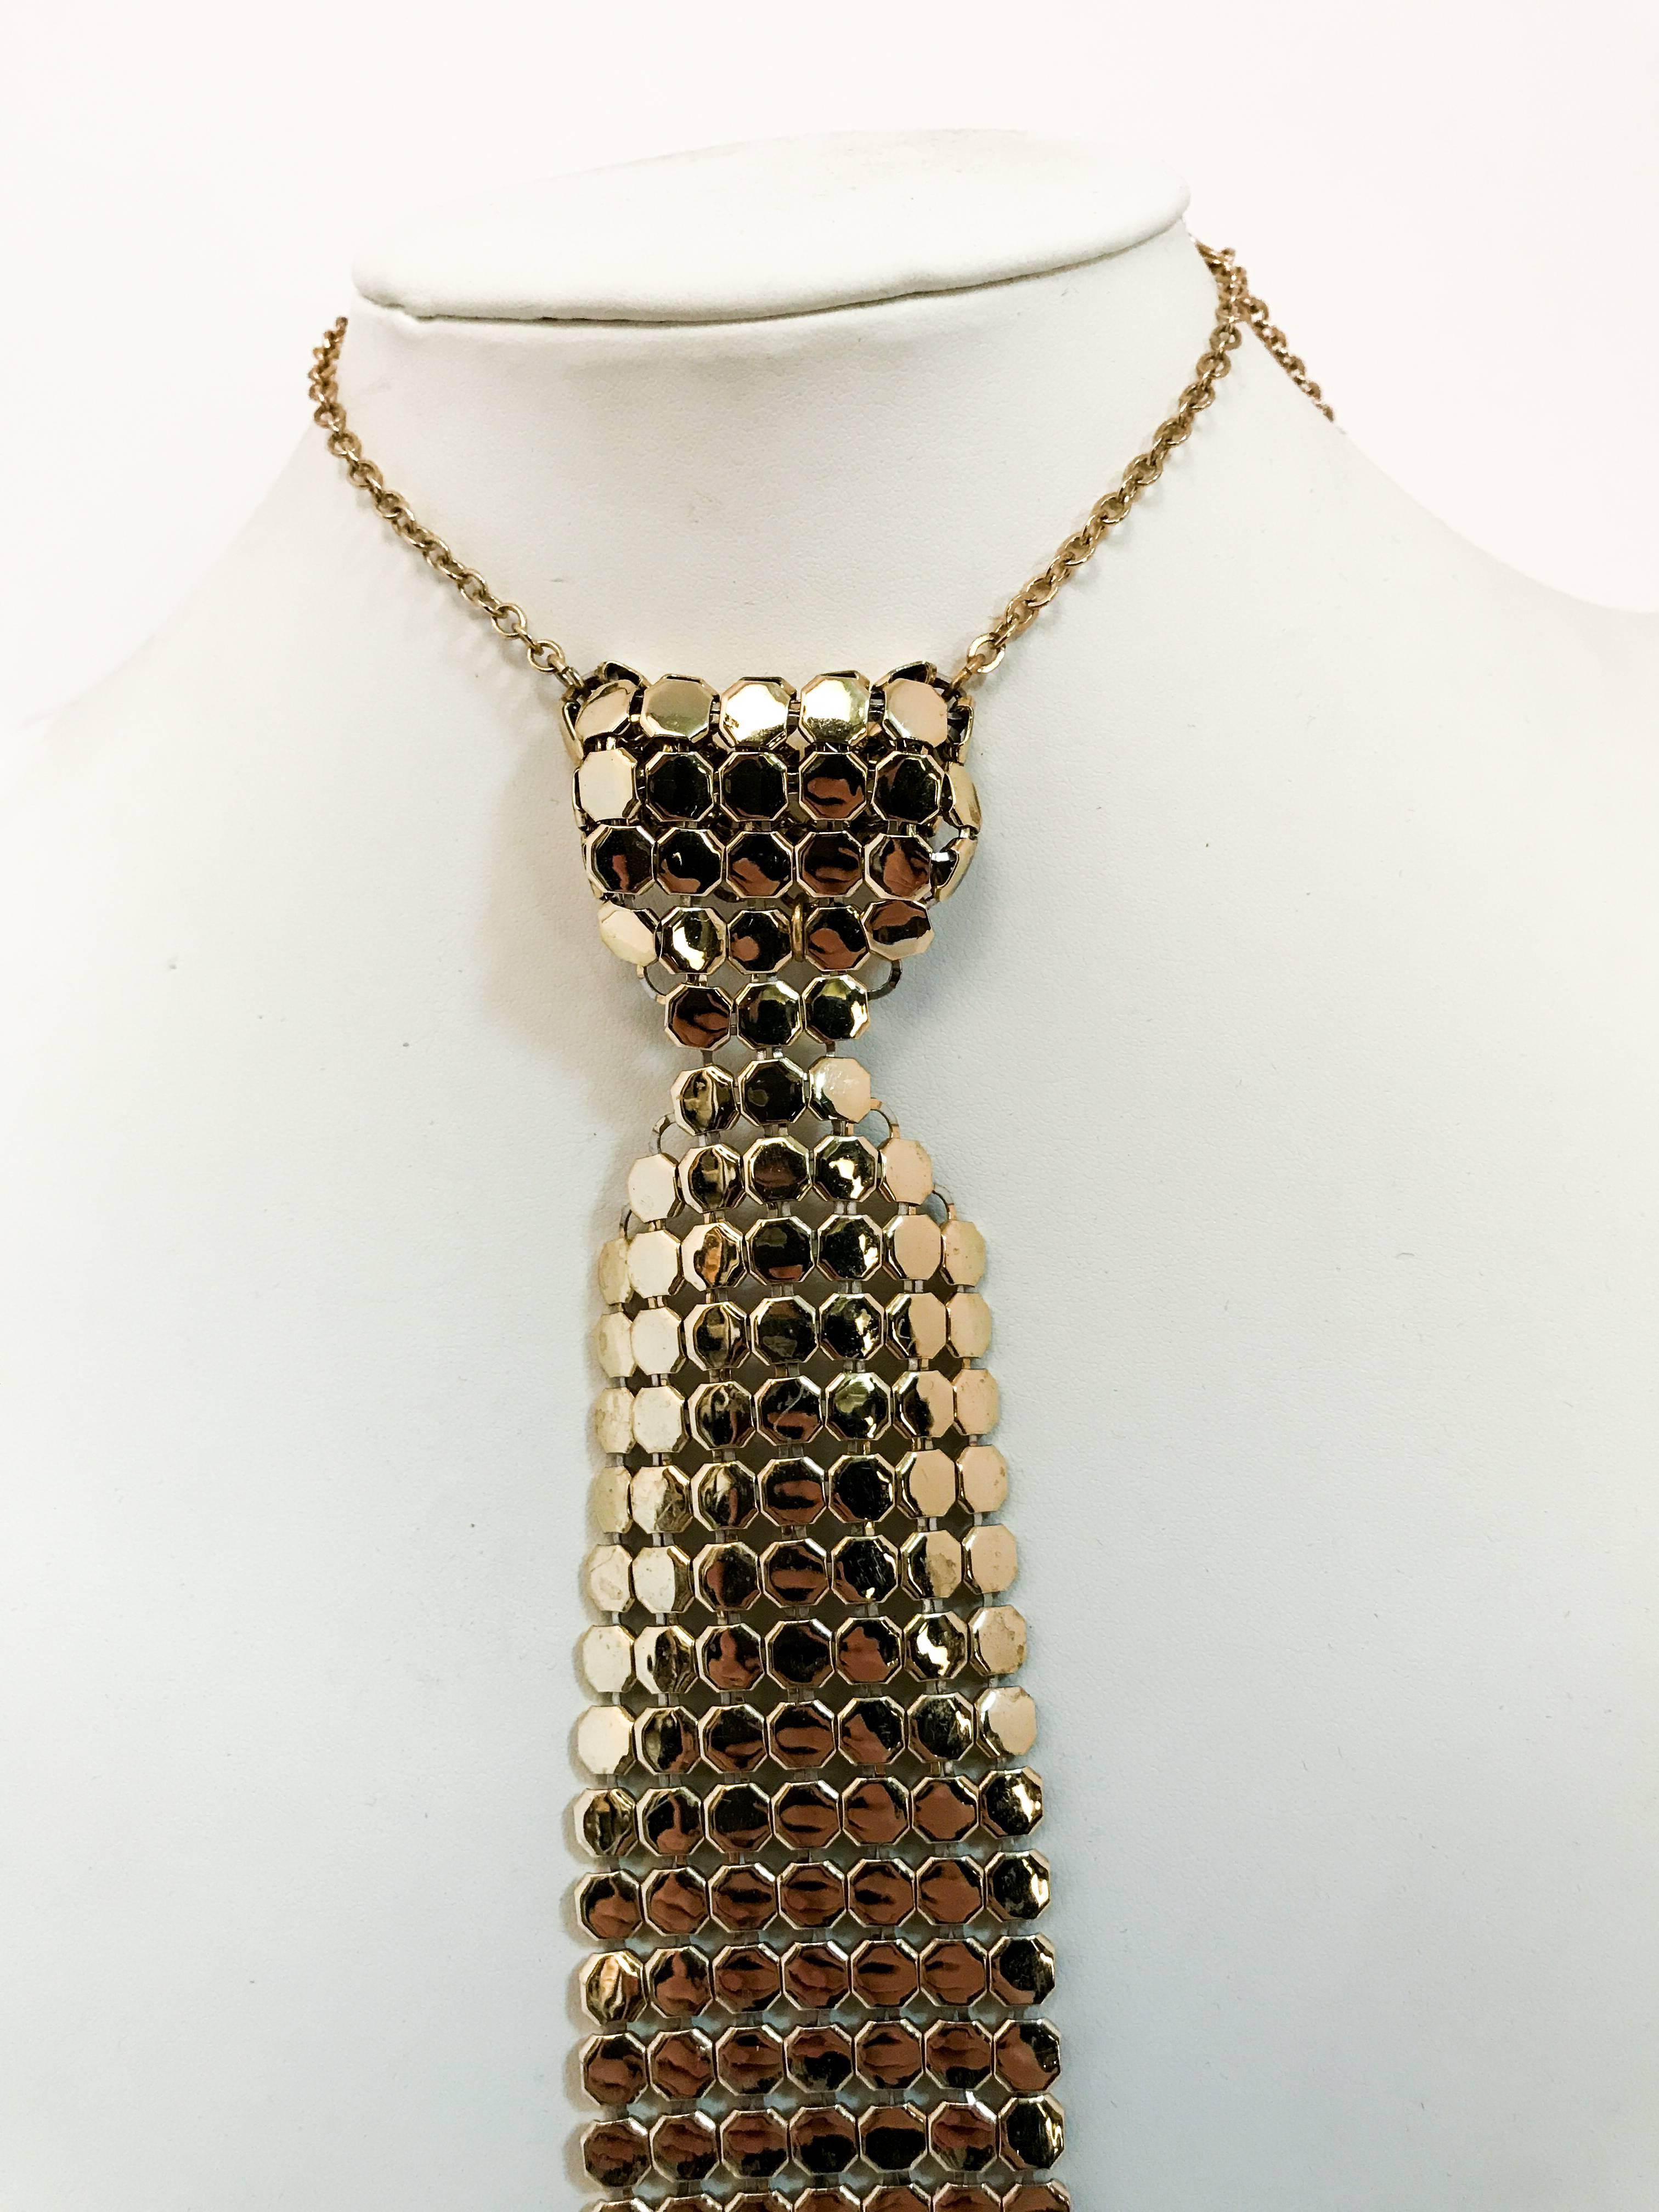 1970s Whiting Davis Gold-tone Tie Necklace. Gold-tone tie necklace with adjustable chain.